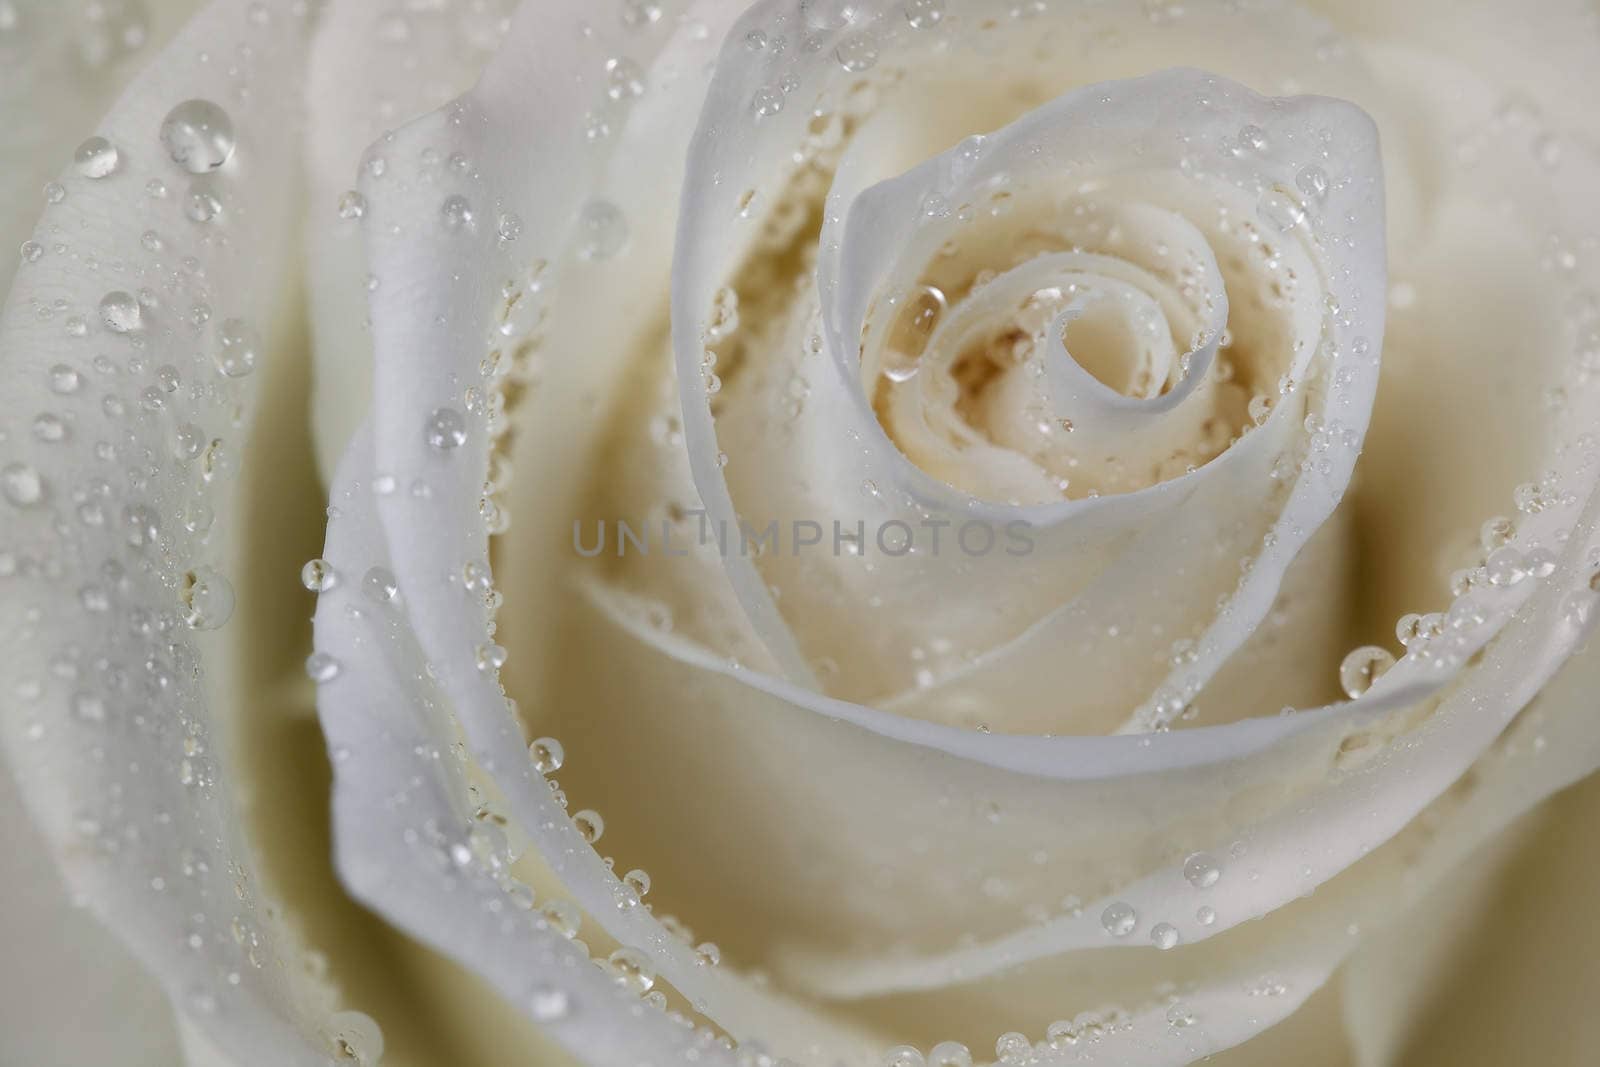 Rosebud with petals in the drops of dew, after a rain.